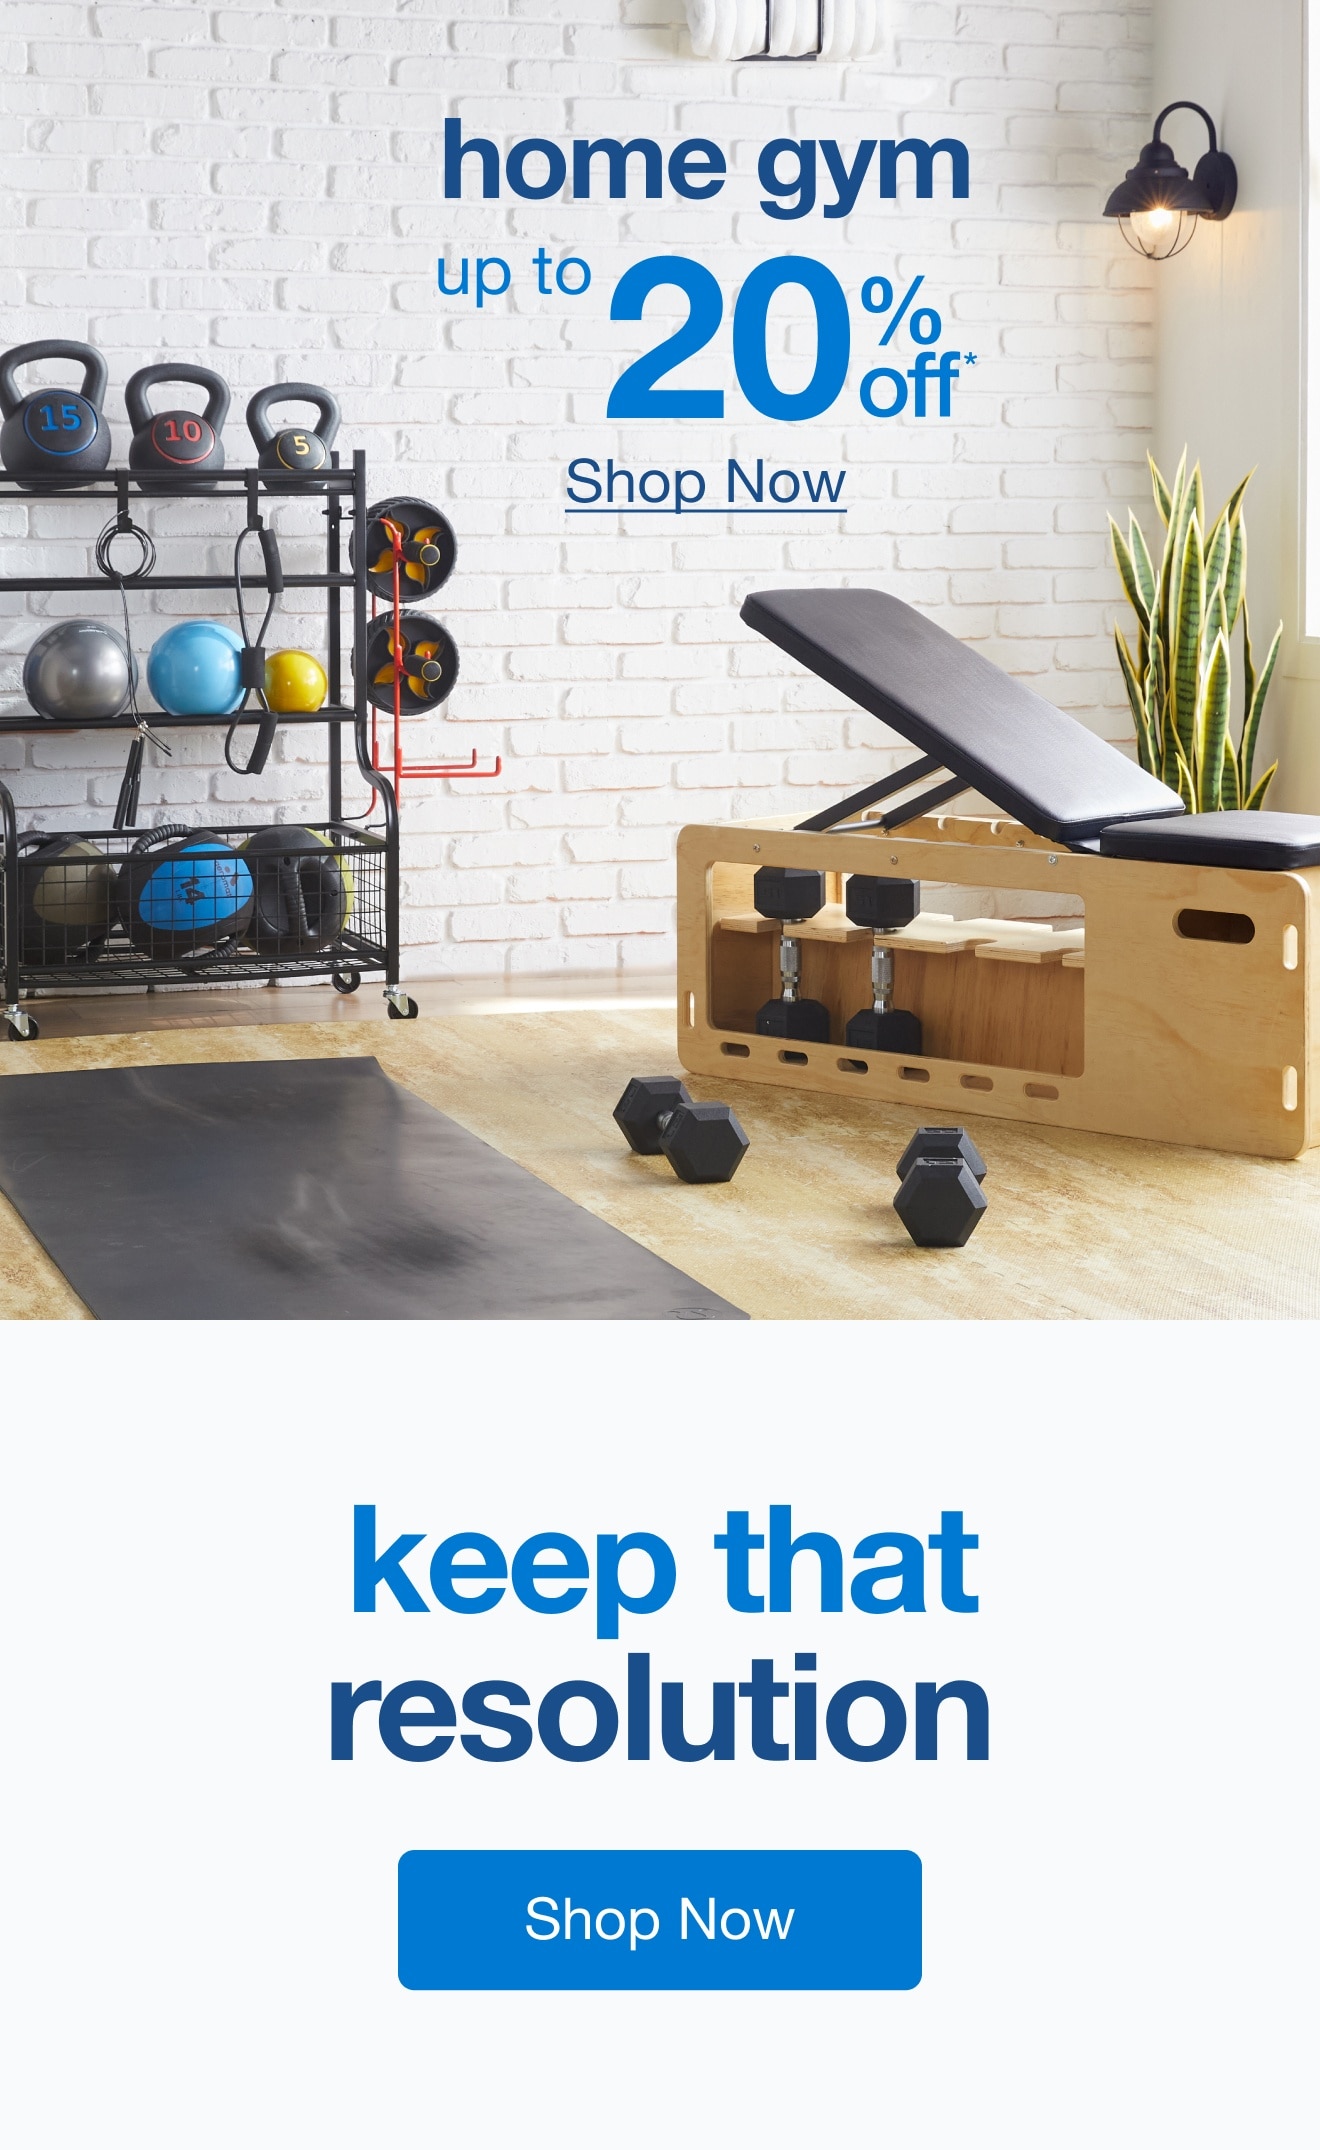 Up to 20% Off Your Dream Home Gym — Shop Now!